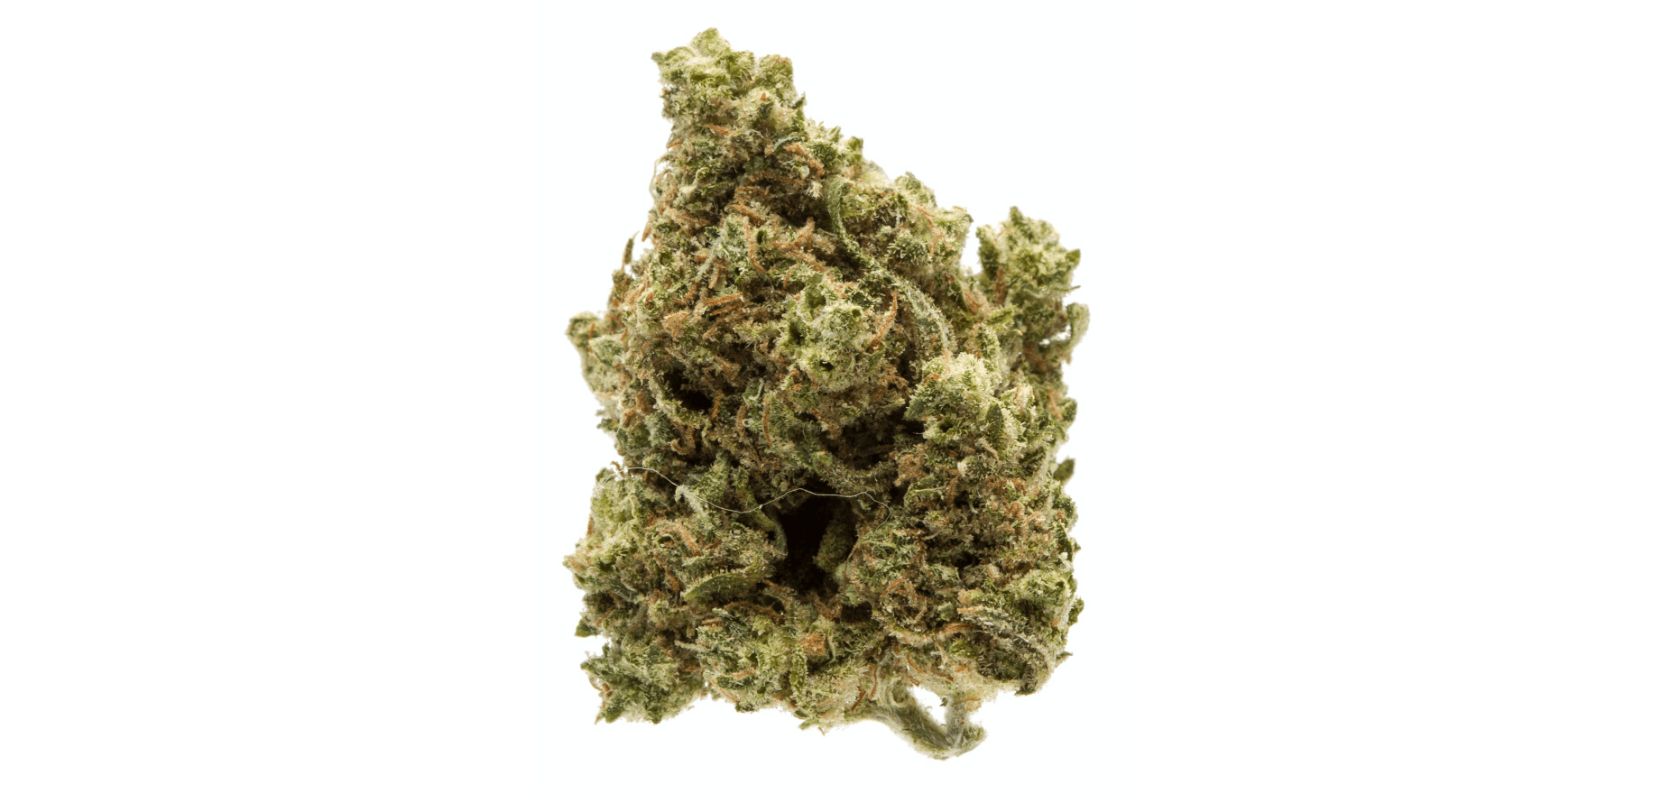 Buy weed online from an experienced dispensary and get the most potent Blue Cheese weed of your life!